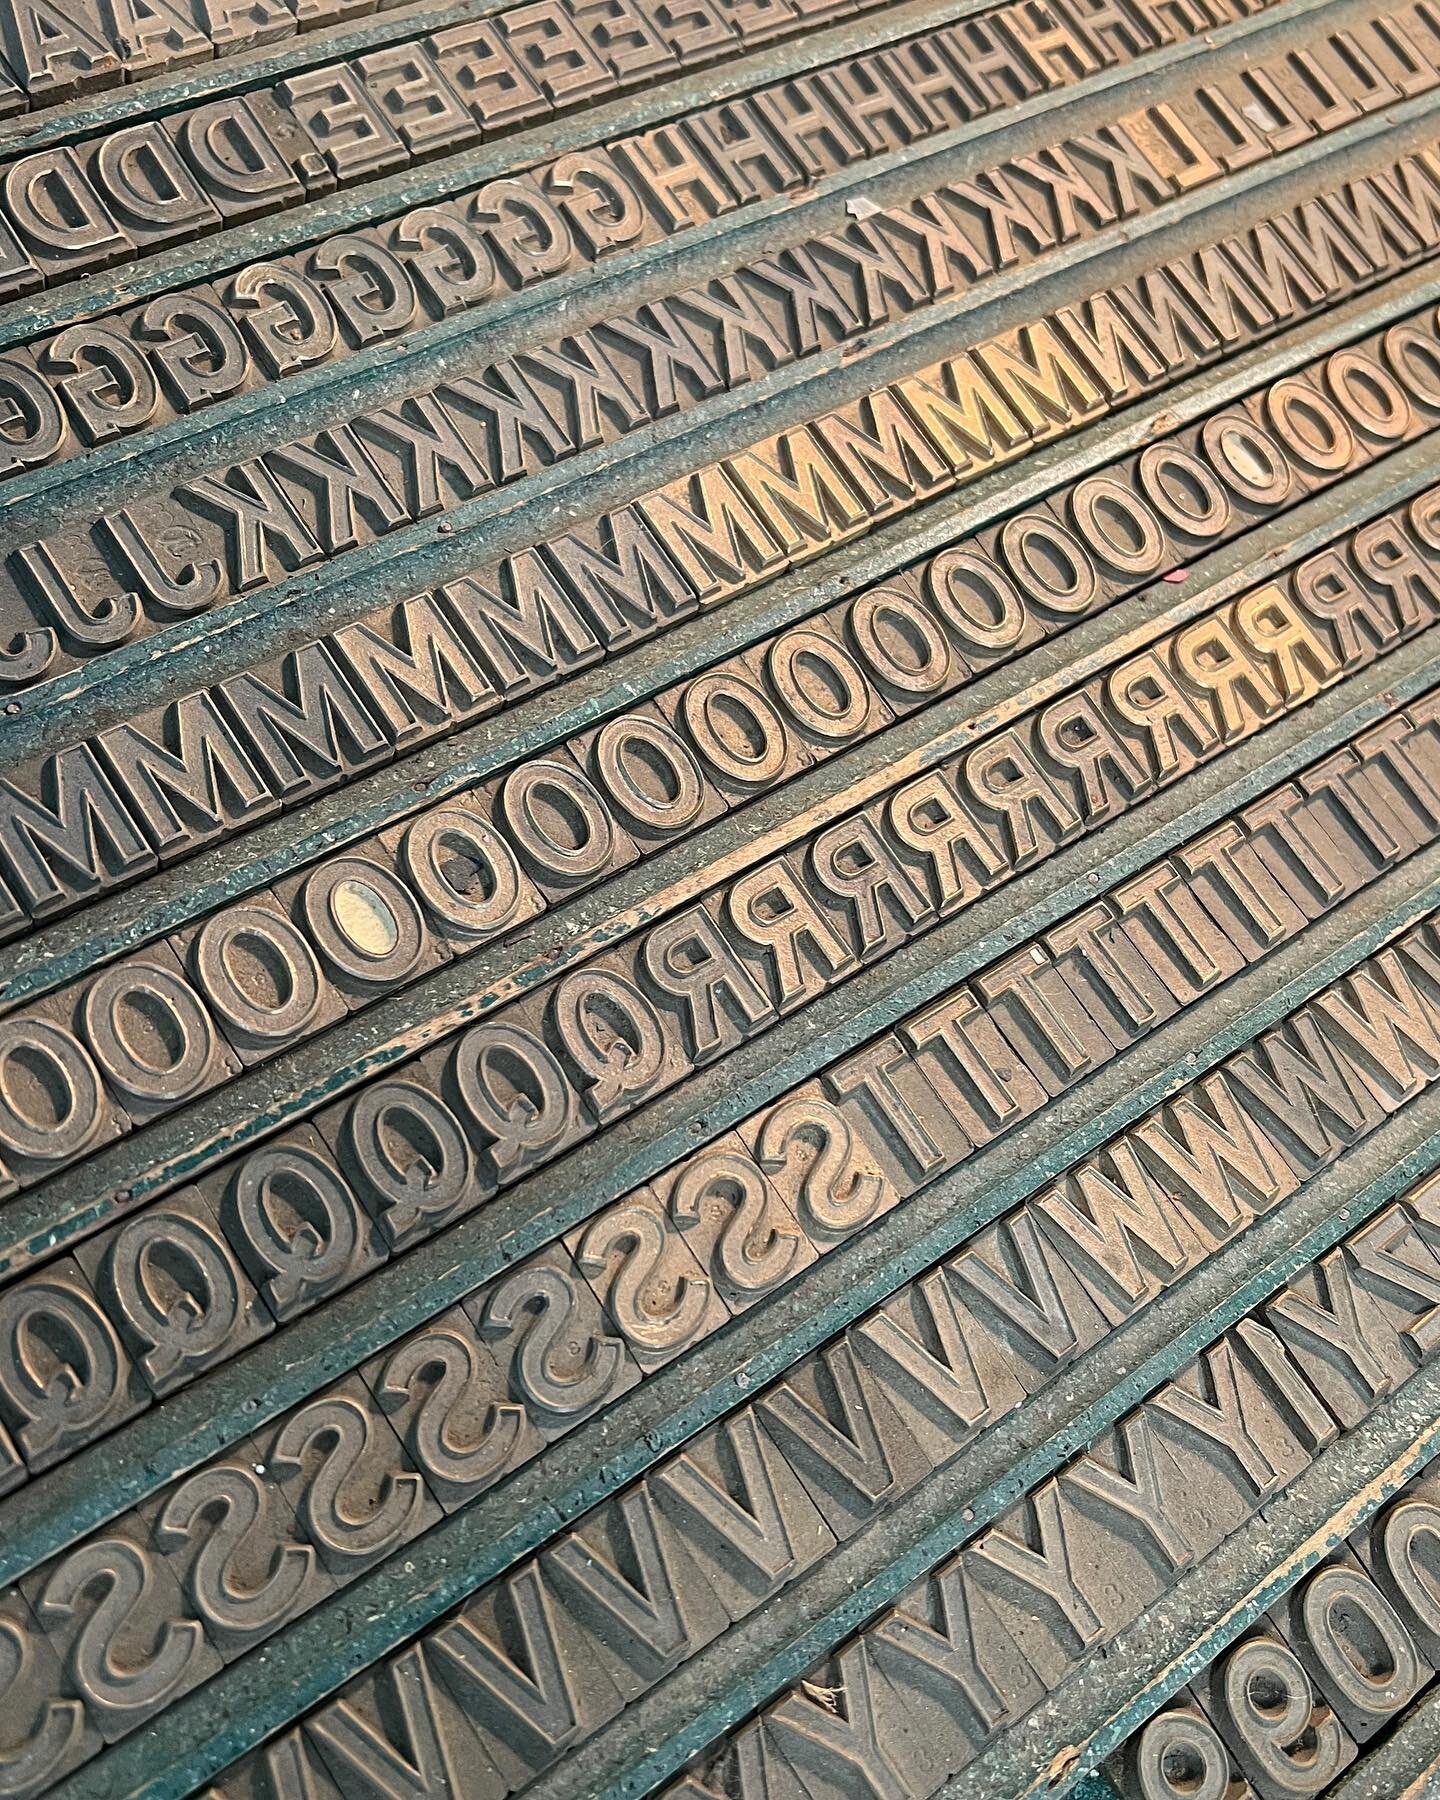 Another Emmie post update!

The embosograf came with multiple trays of type, all of which were covered in dust, grime, and who knows what else. My part time studio assistant is scrubbing them with bar keeper&rsquo;s friend and a toothbrush to get the